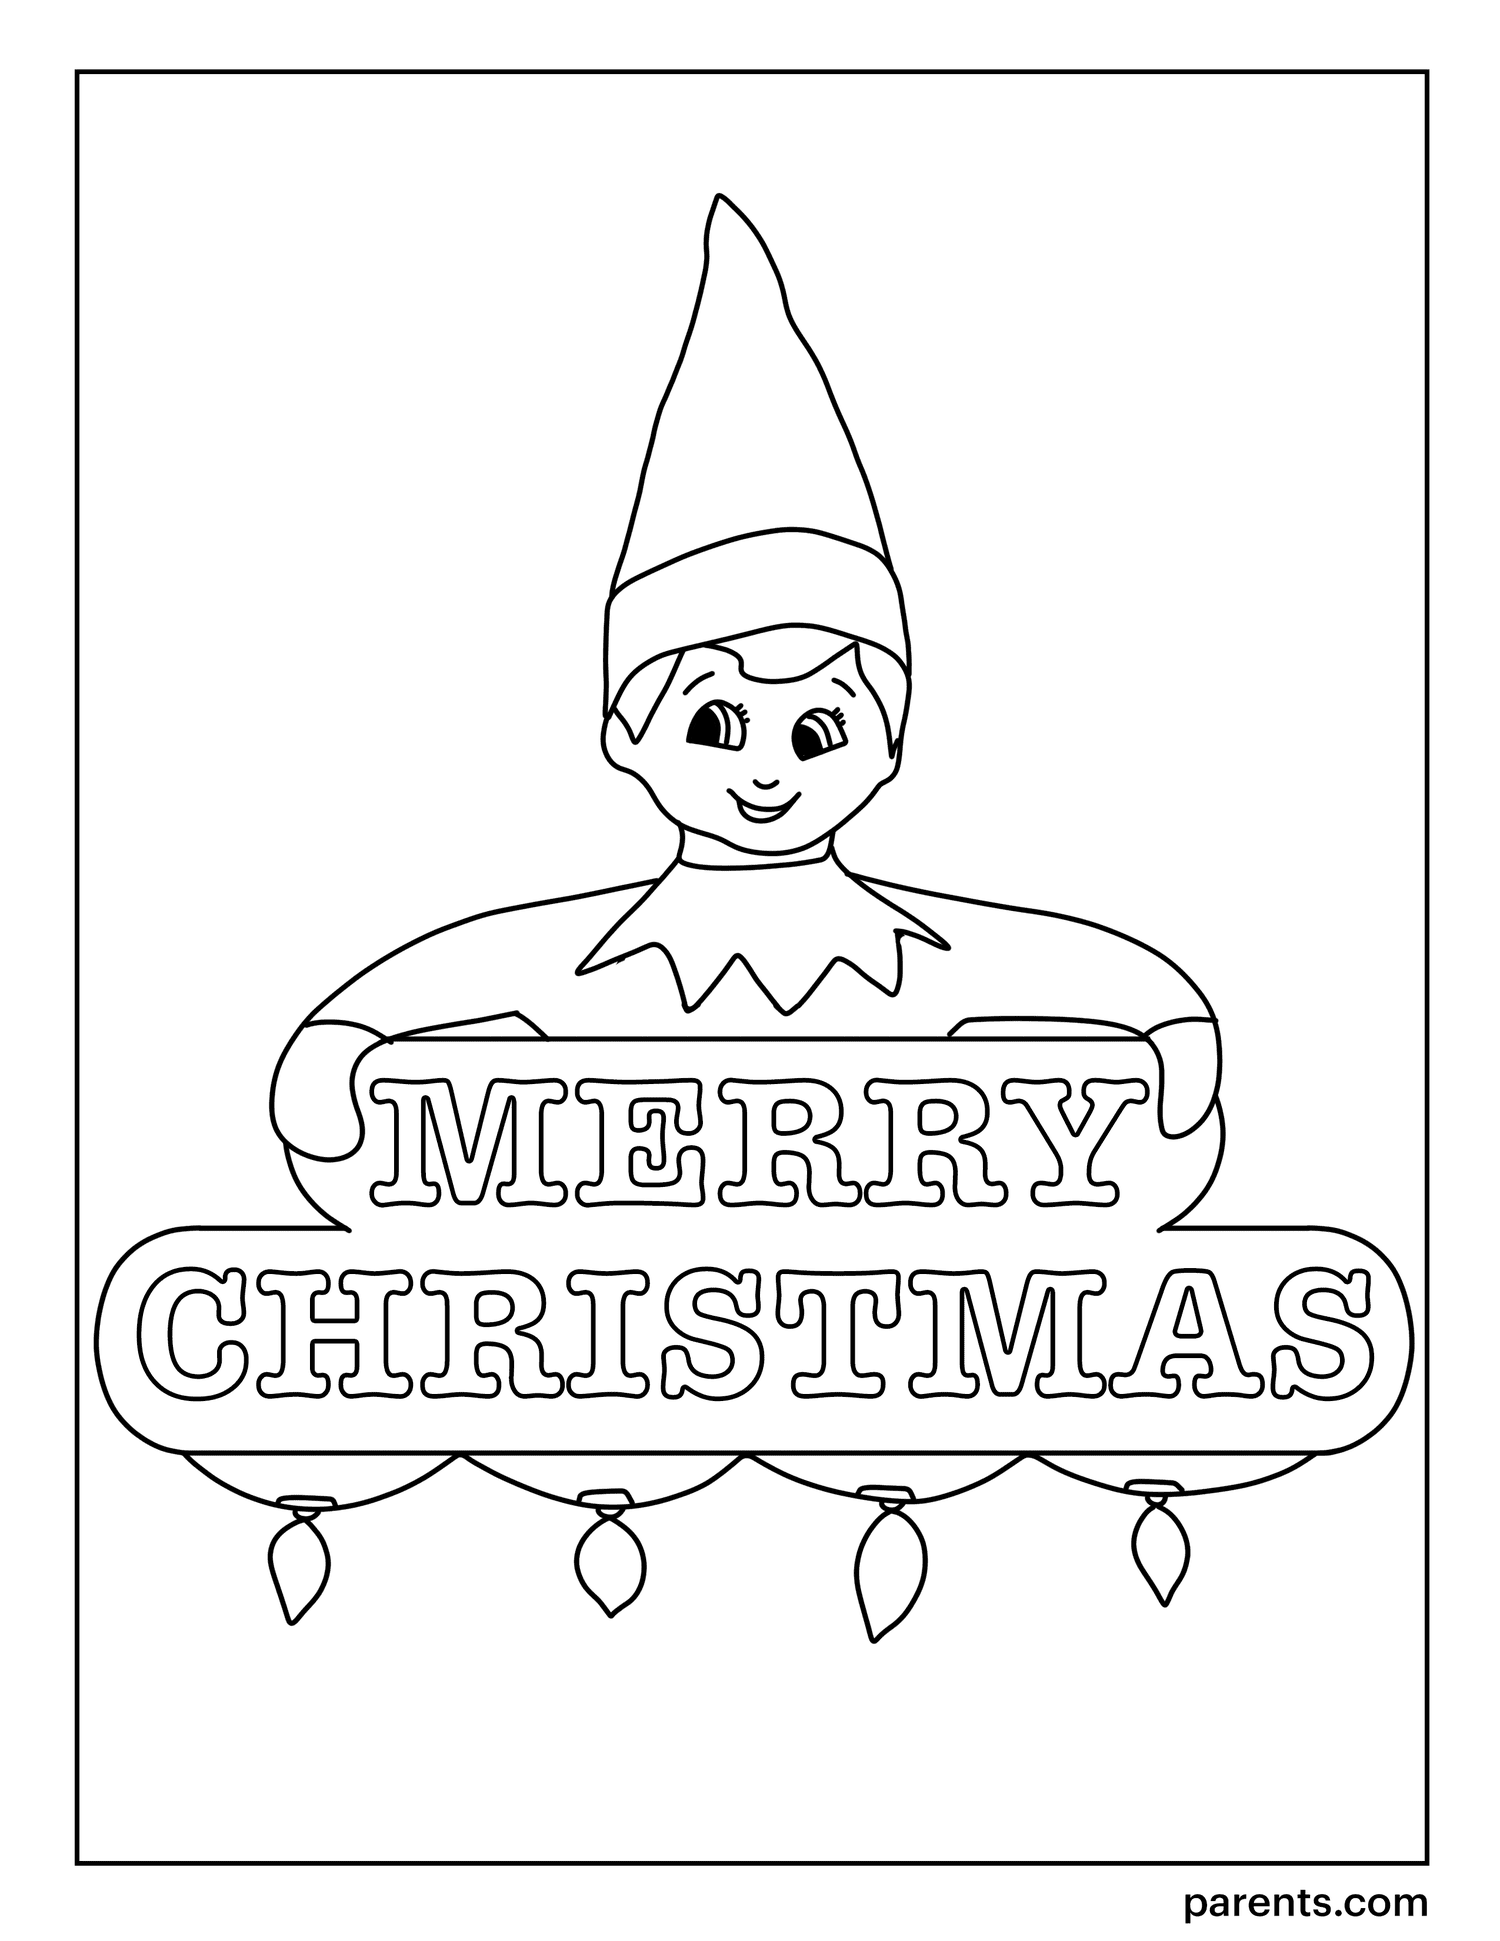 7 Elf On The Shelf Inspired Coloring Pages To Get Kids Excited For Christmas Parents